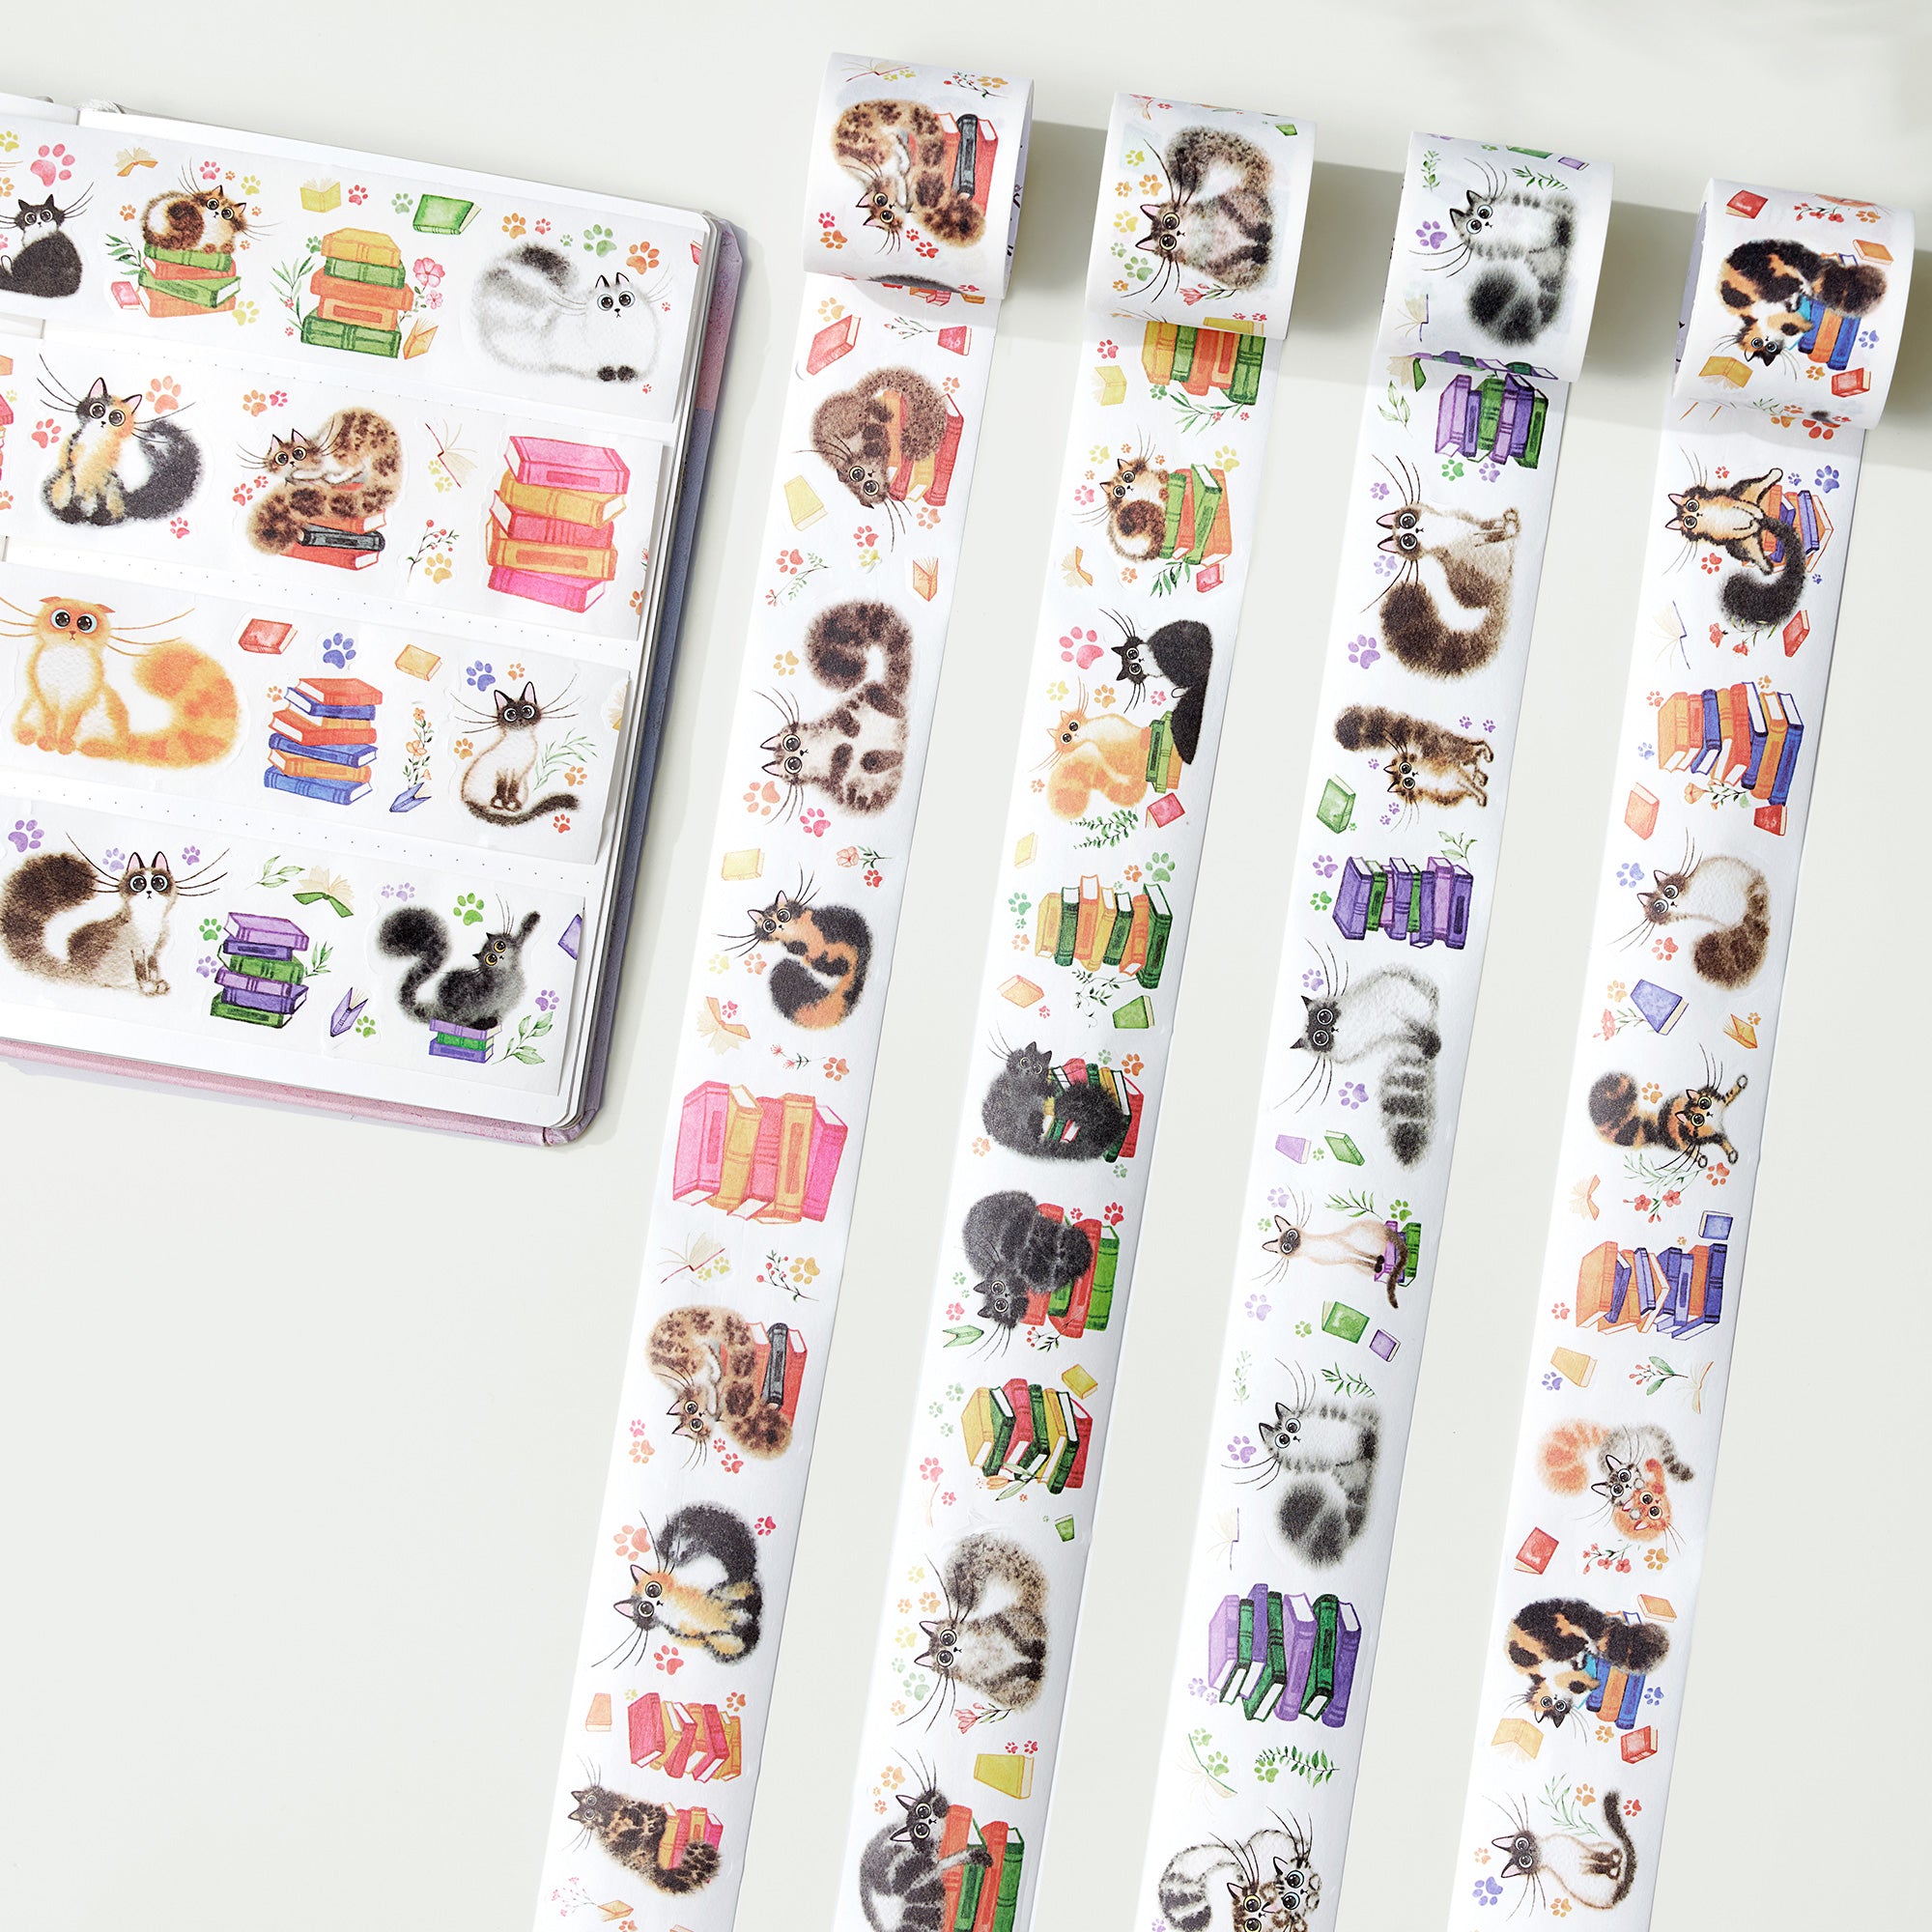 Kitten&#39;s Play Washi Tape Sticker Set | The Washi Tape Shop. Beautiful Washi and Decorative Tape For Bullet Journals, Gift Wrapping, Planner Decoration and DIY Projects